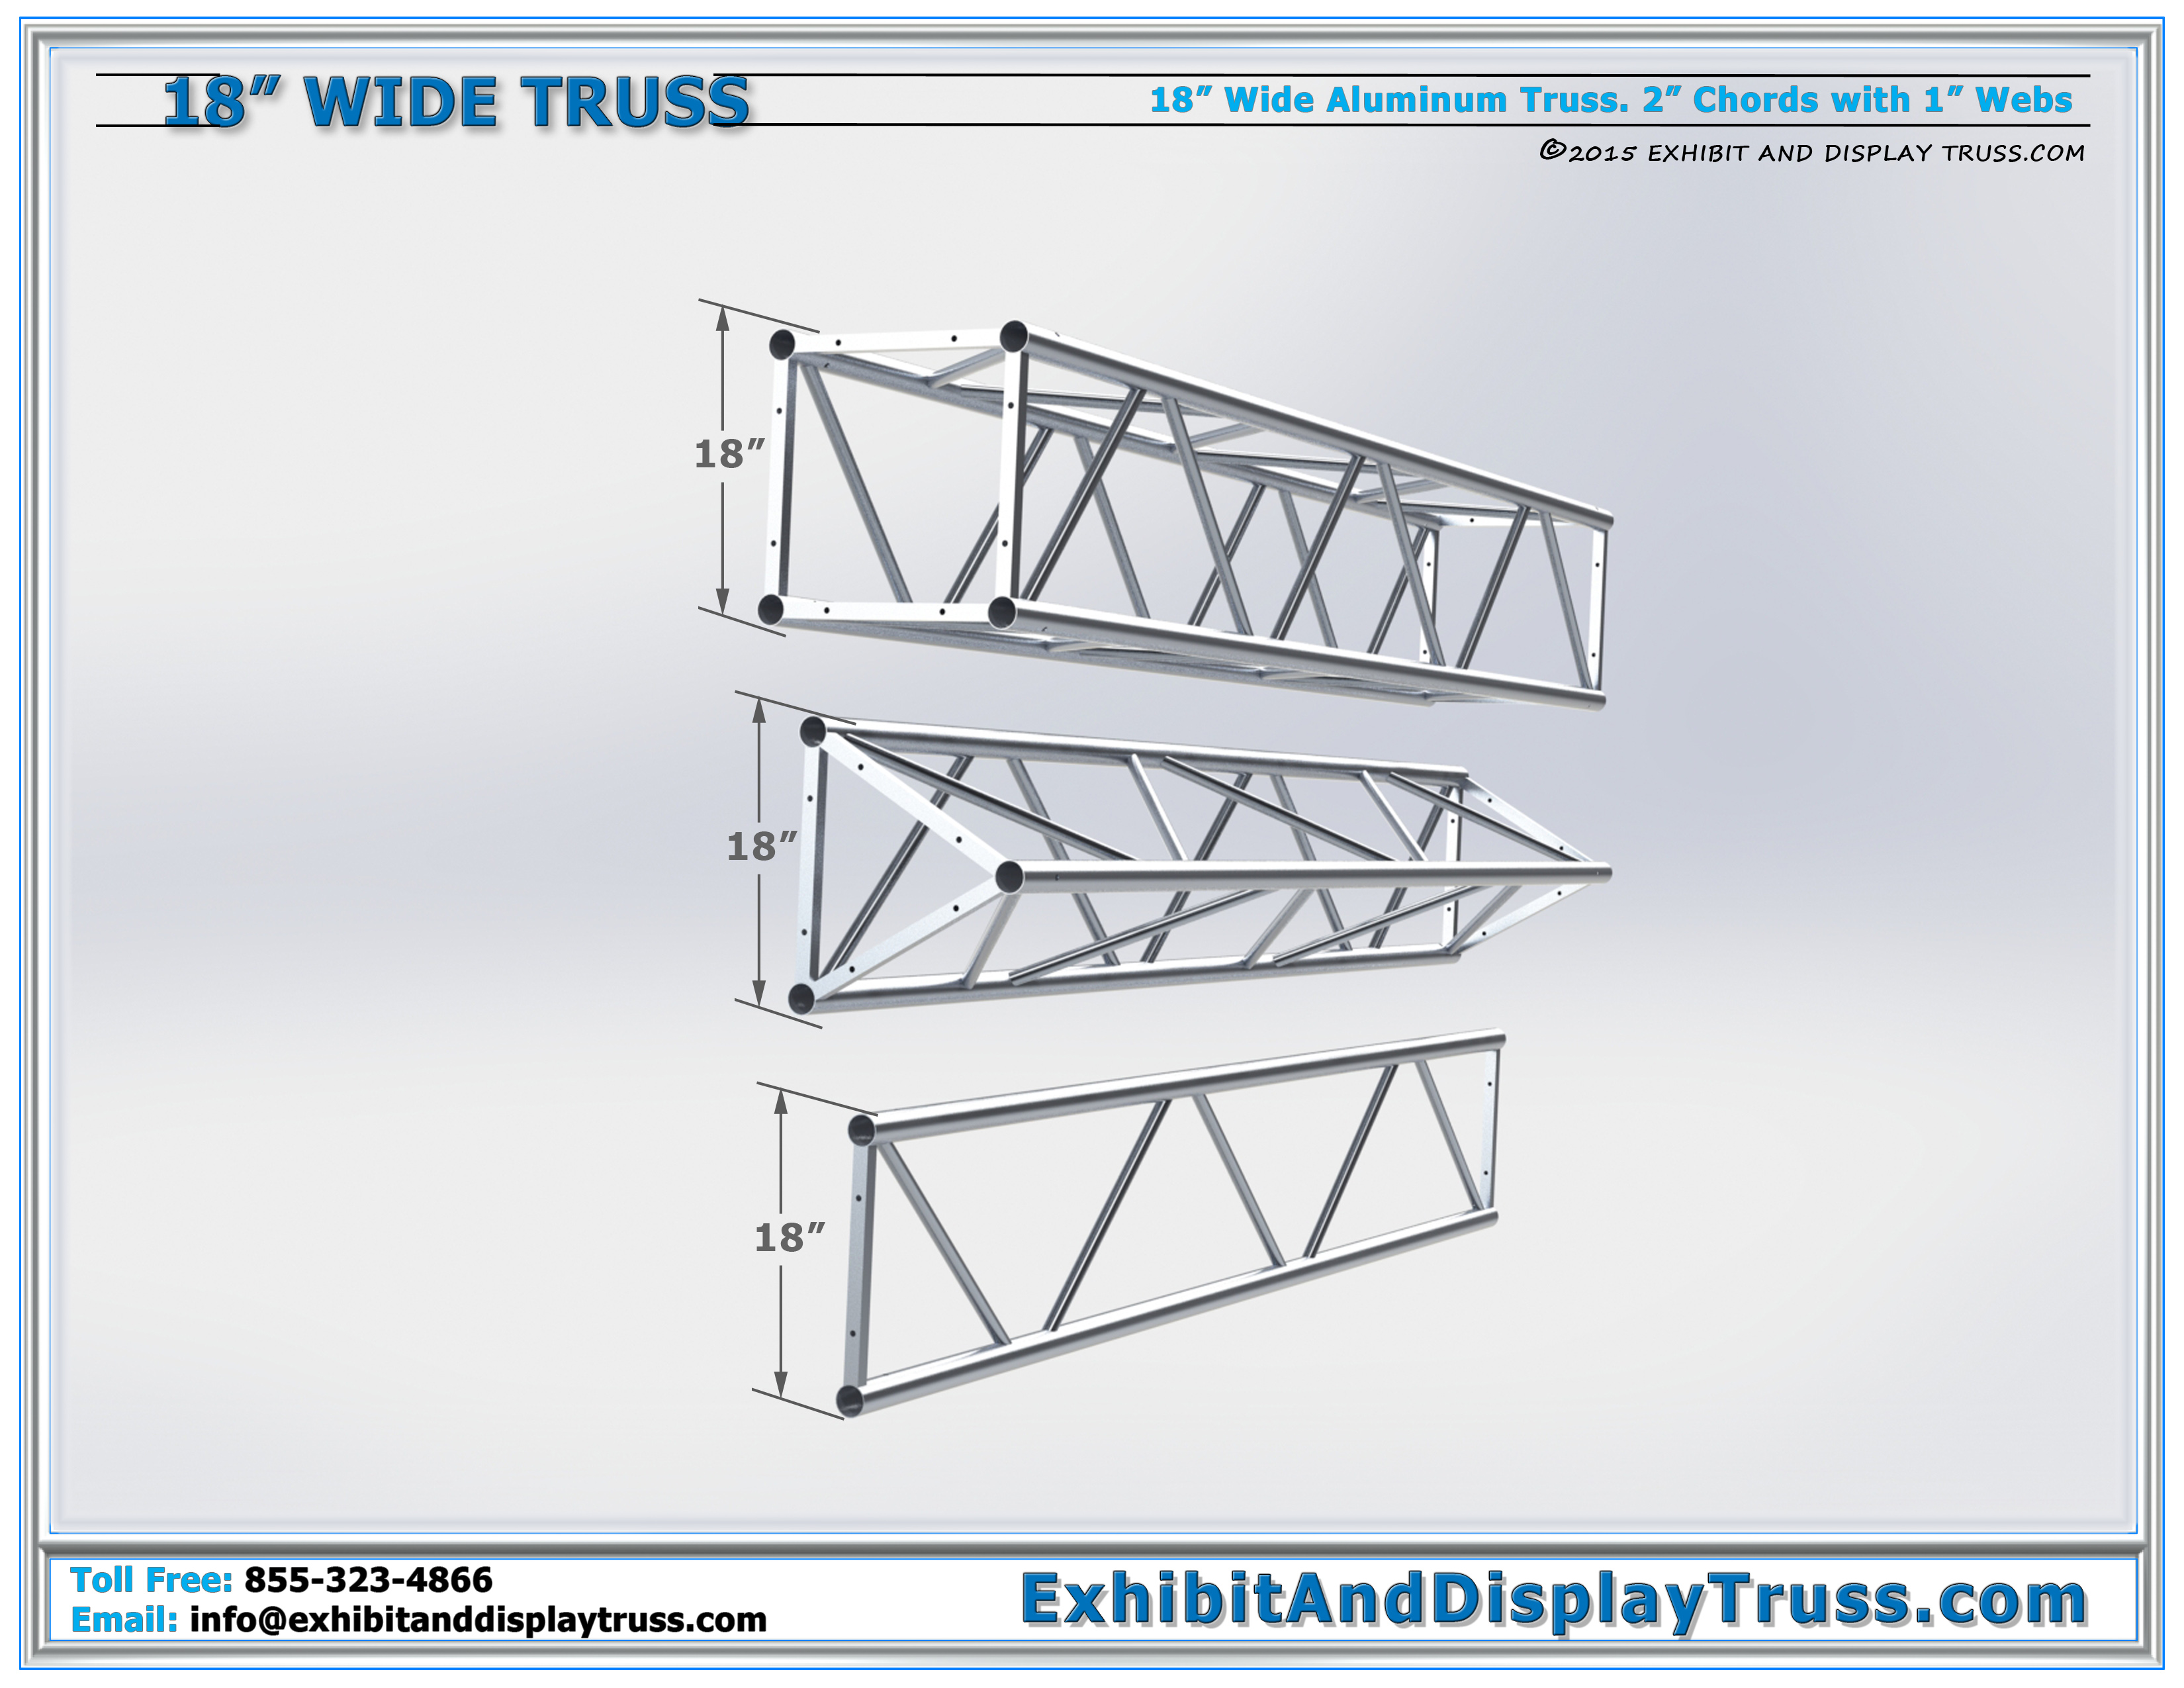 18” Wide Aluminum Truss| Stage Lighting and Rigging Truss Stocked In: Box / Square, Triangle and Flat / Ladder